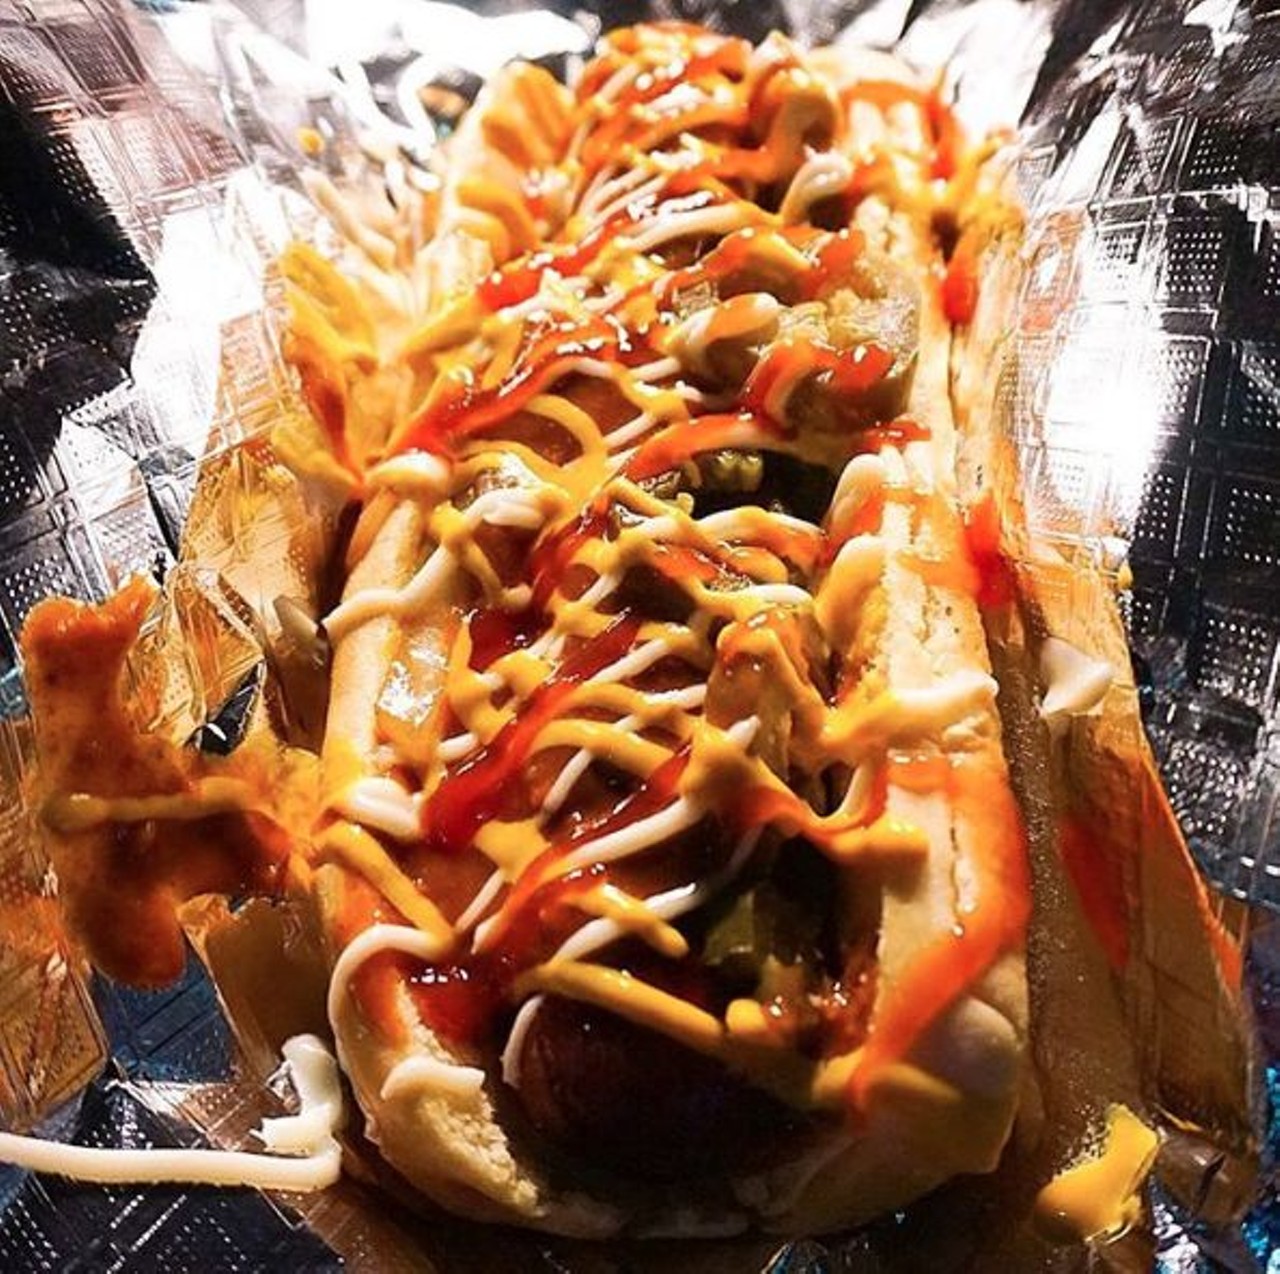 Alamo Hot Dog Co.
Multiple locations, (210) 831-2409, facebook.com
When your dogs are barking from a night of dancing, order up a few hot dogs, or at least one wrapped in bacon. Open until 1 a.m. on select nights.
Photo via Instagram, miss_eater_tx